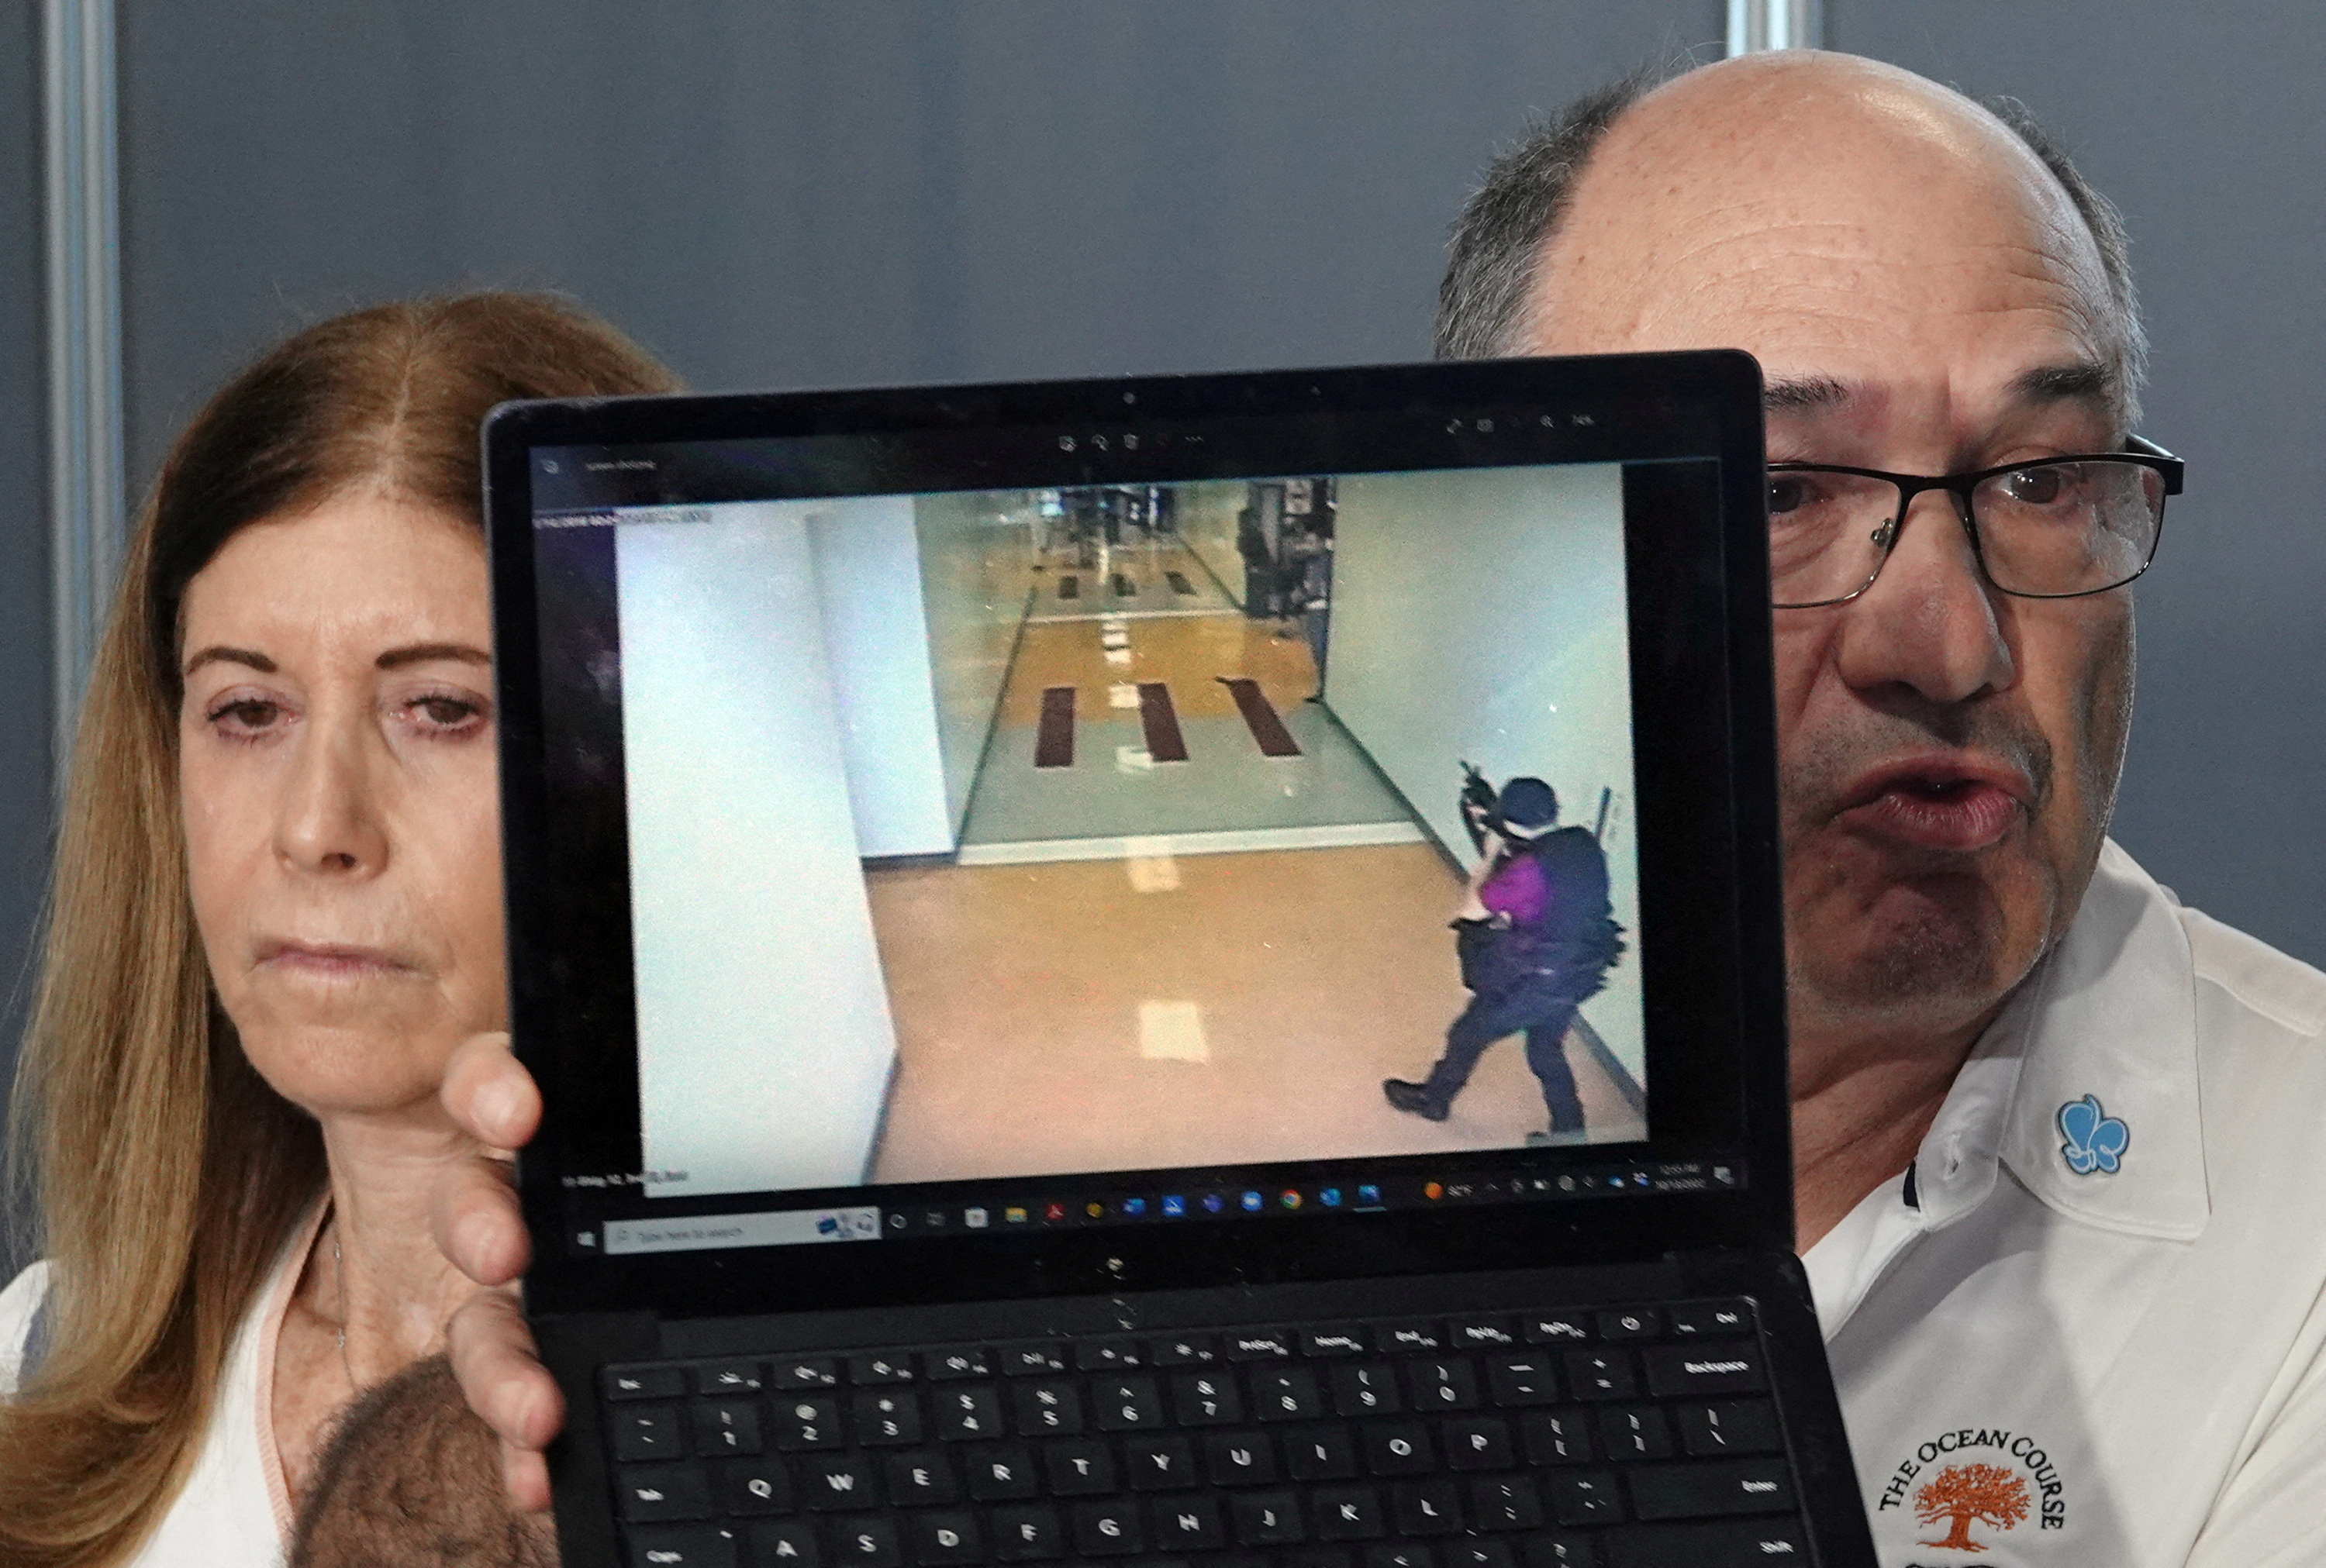 "This is the last thing my son saw"Michael Schulman said showing a video of the massacre (via Reuters/File)